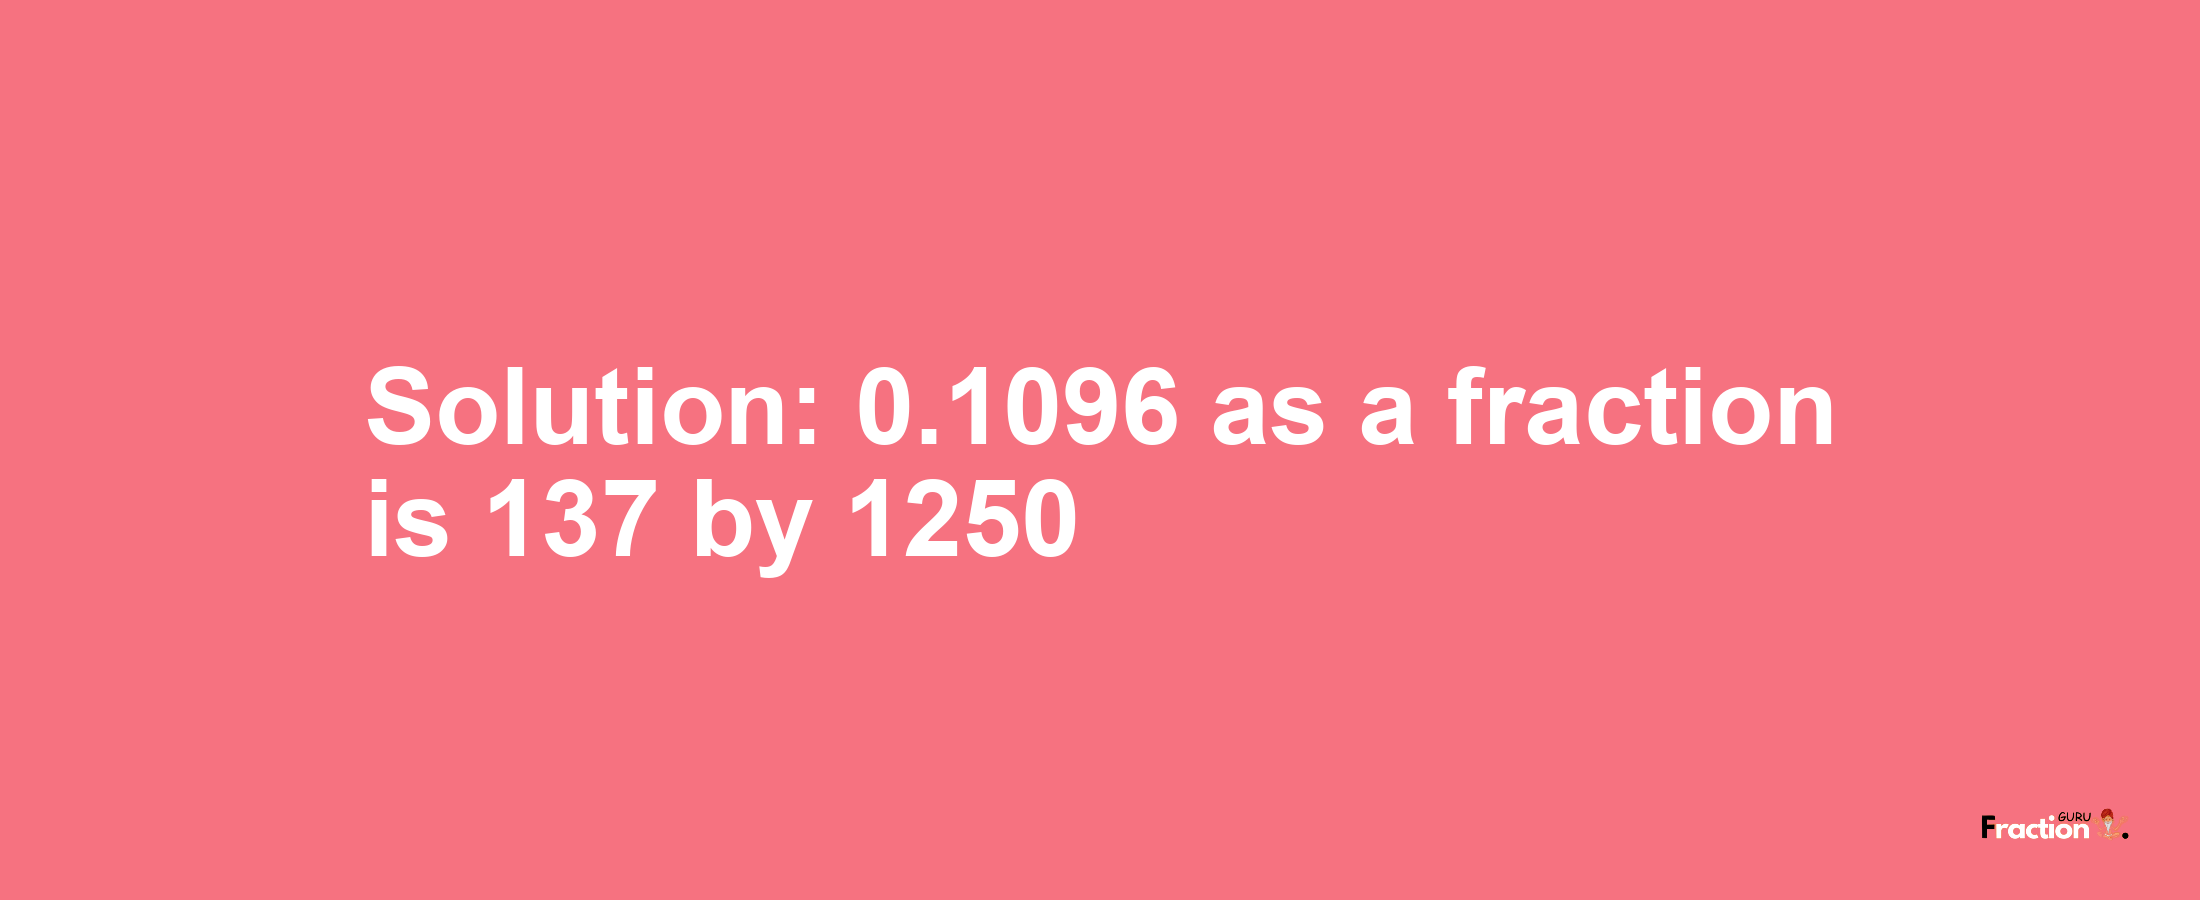 Solution:0.1096 as a fraction is 137/1250